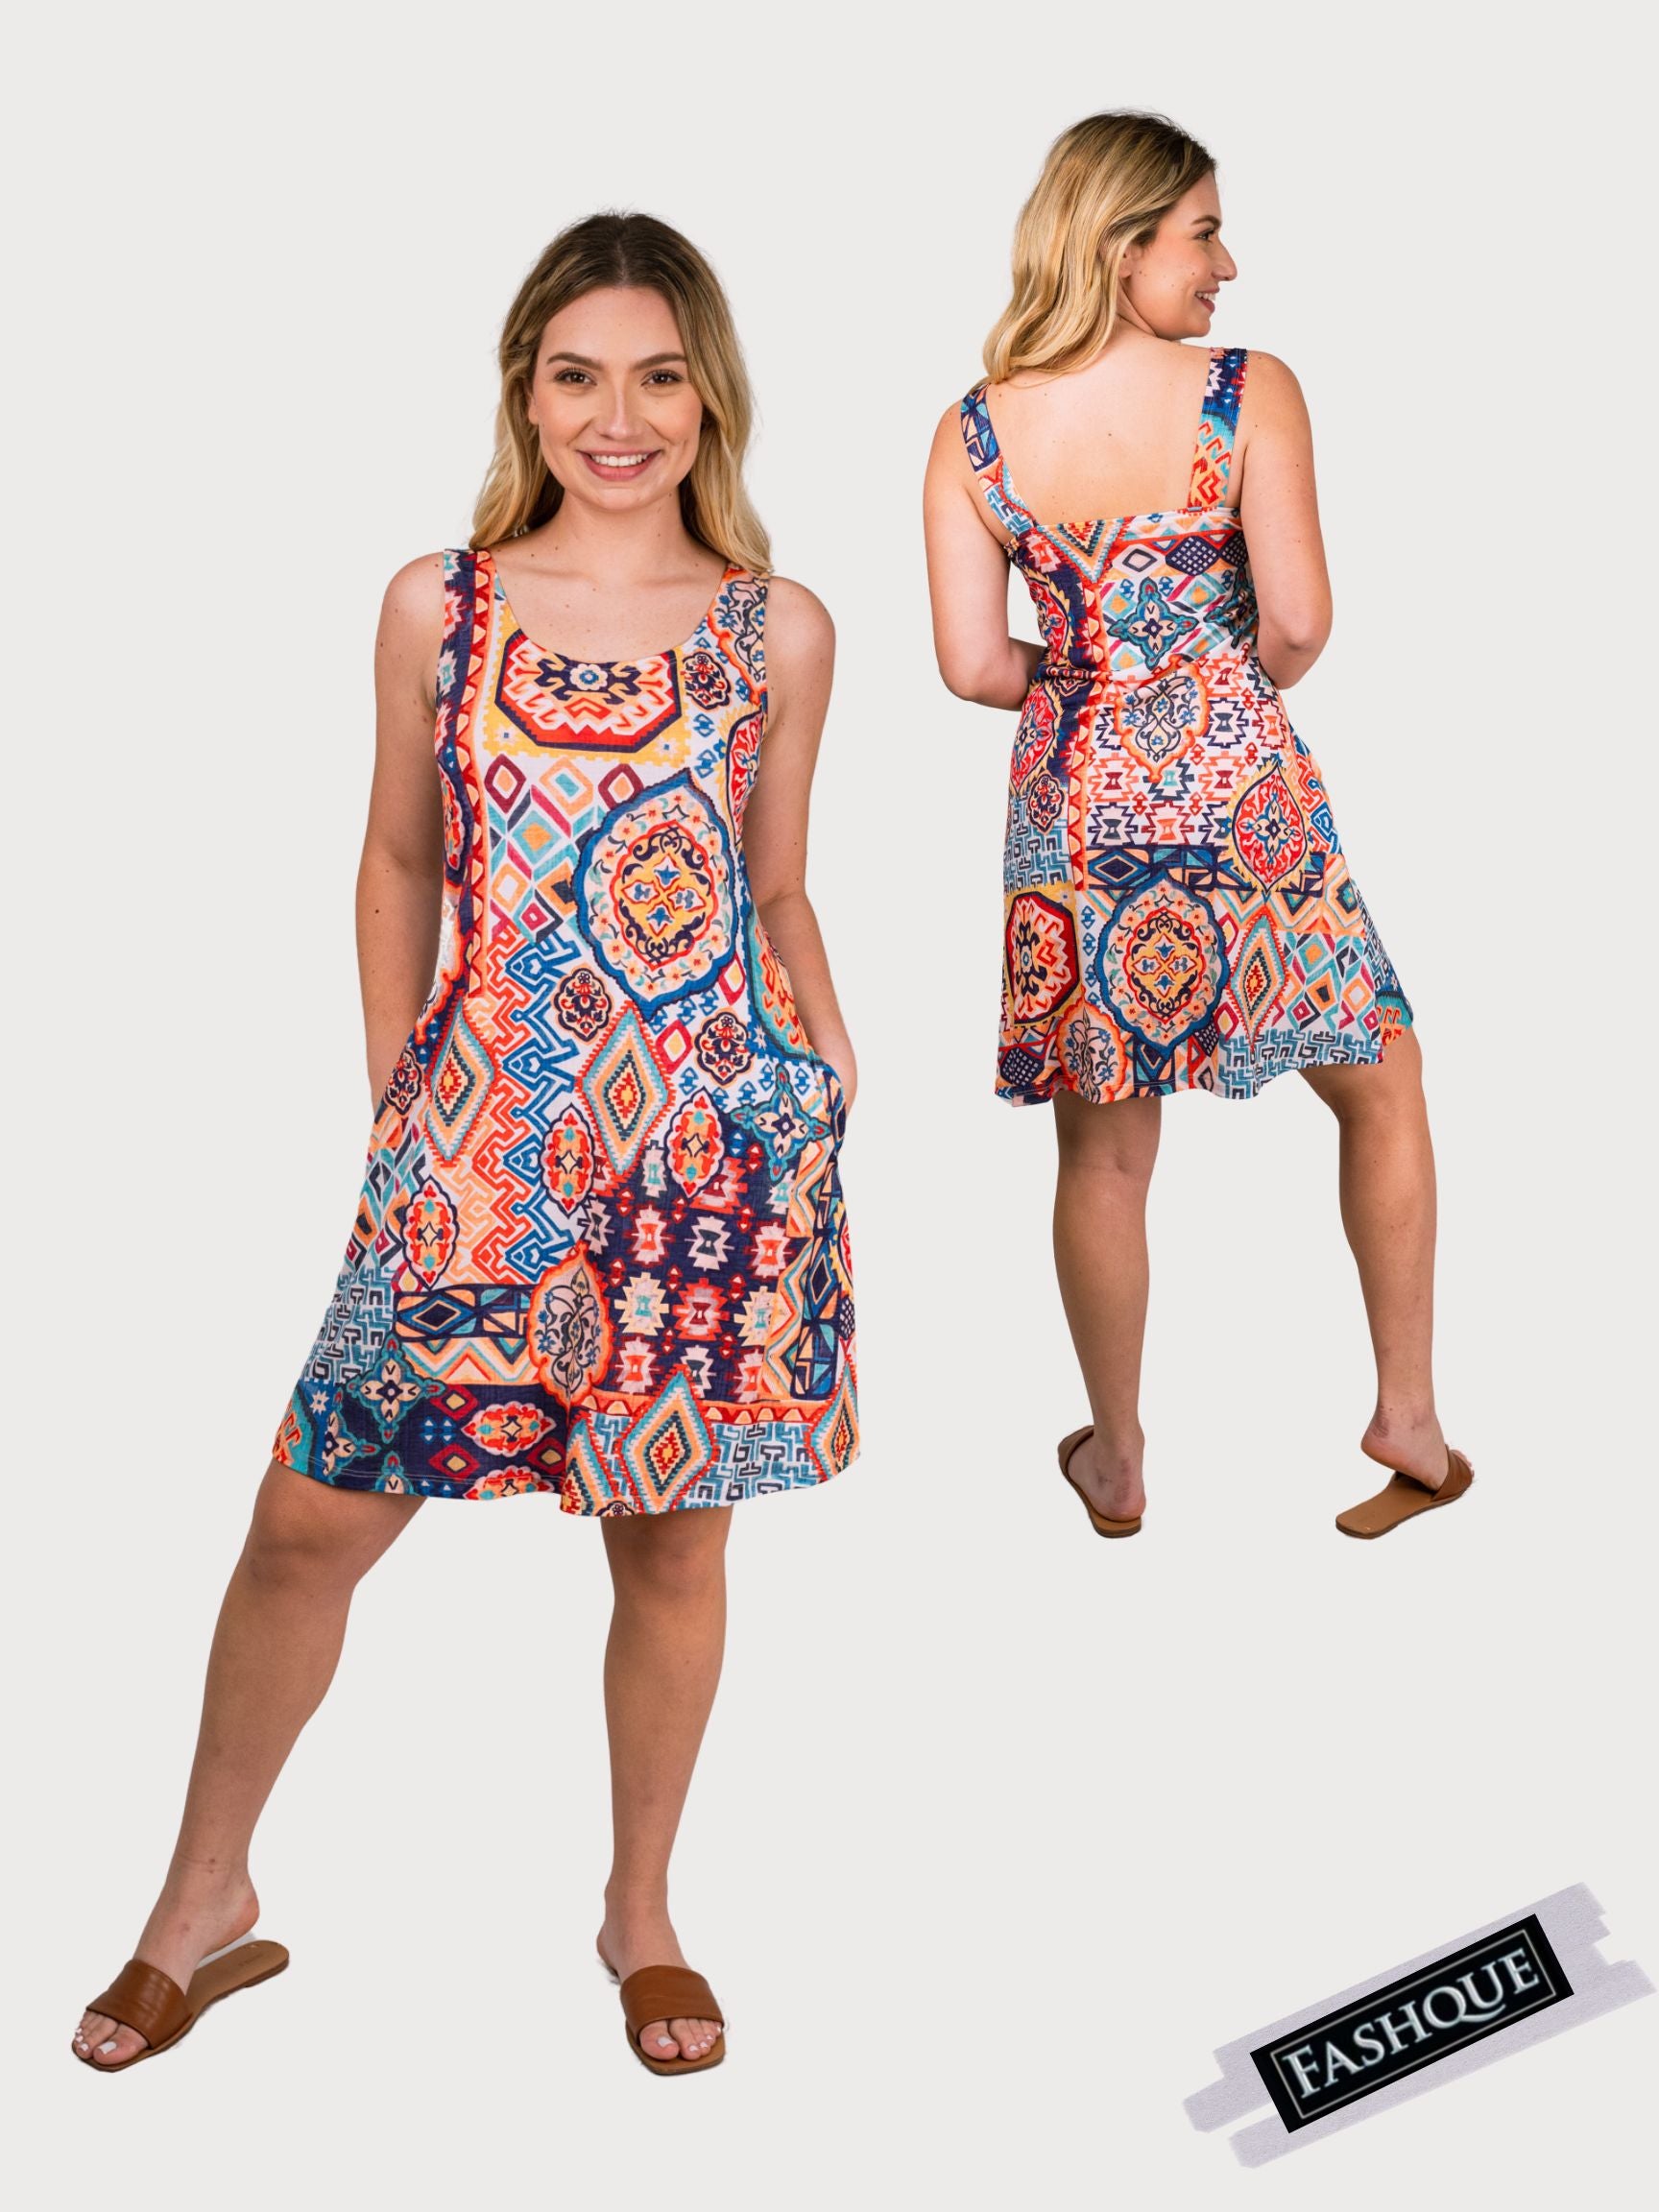 FASHQUE - SUNDRESS - Skater Style tank dress with square back with Pockets - D2061